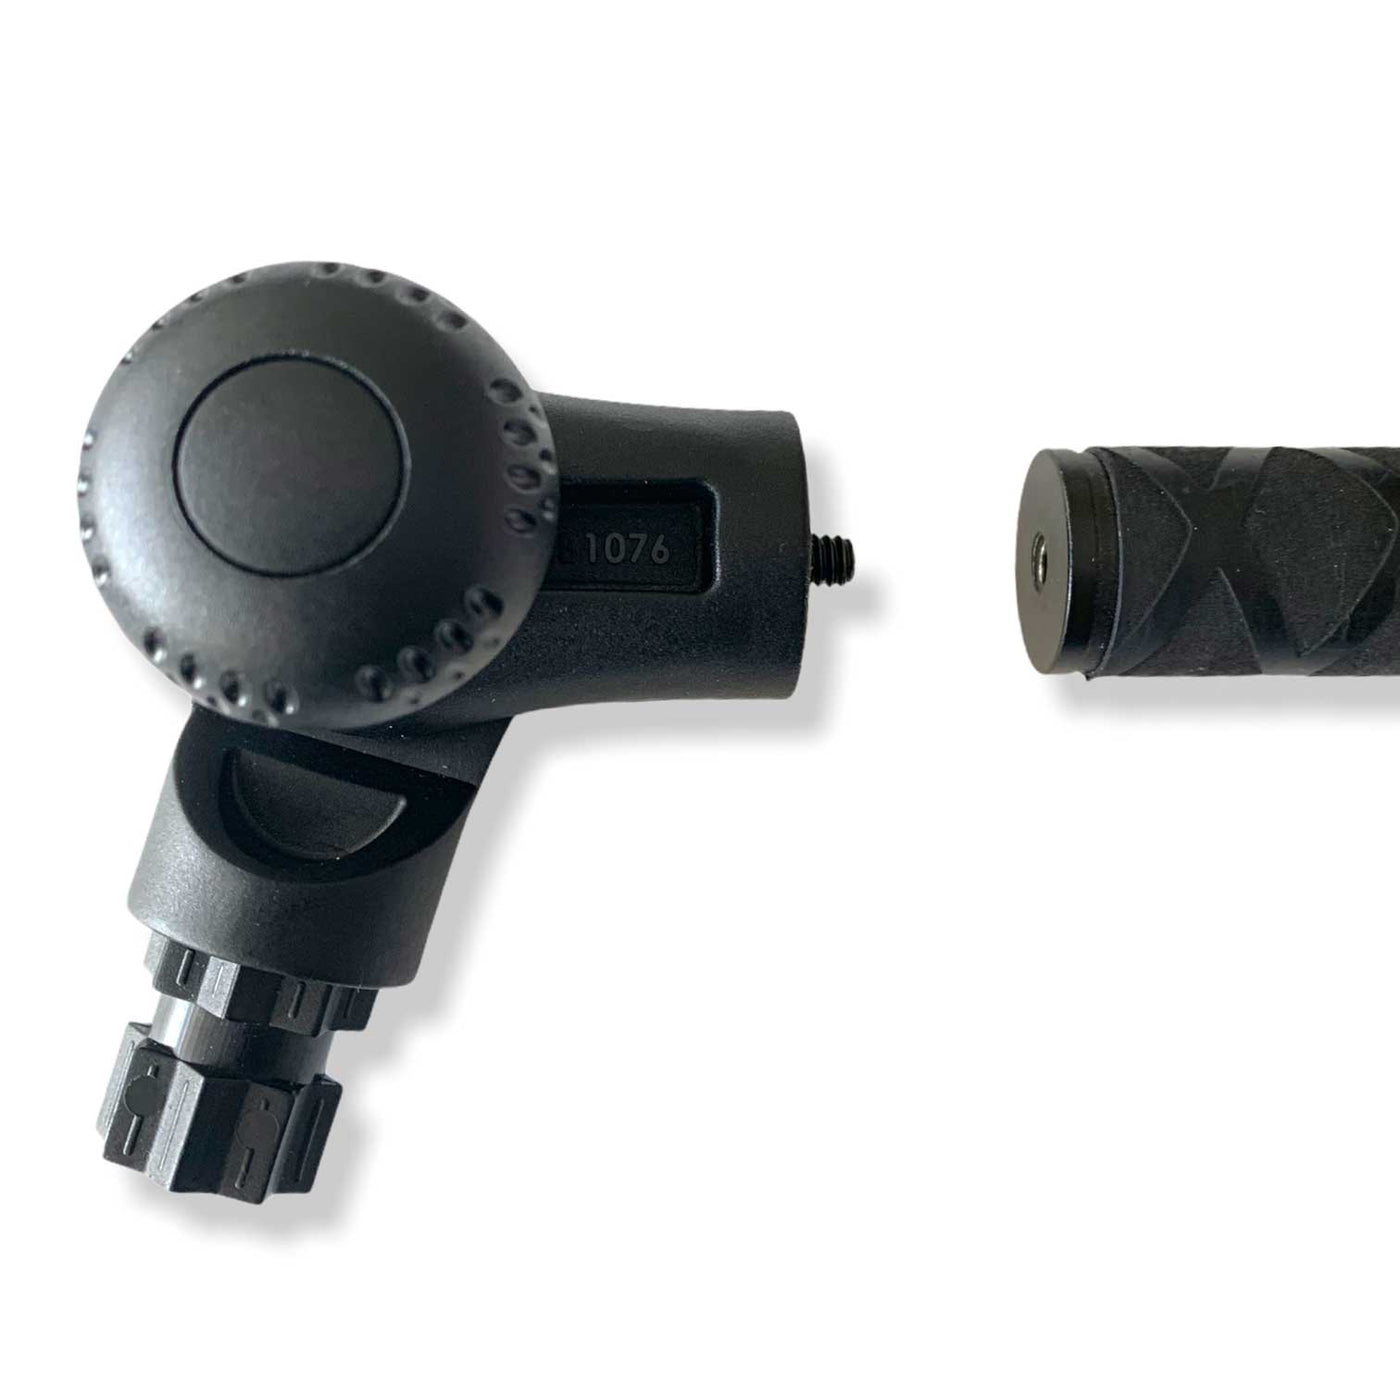 3rdPersonView Shoulder Mount for Insta360 (camera pole NOT included)